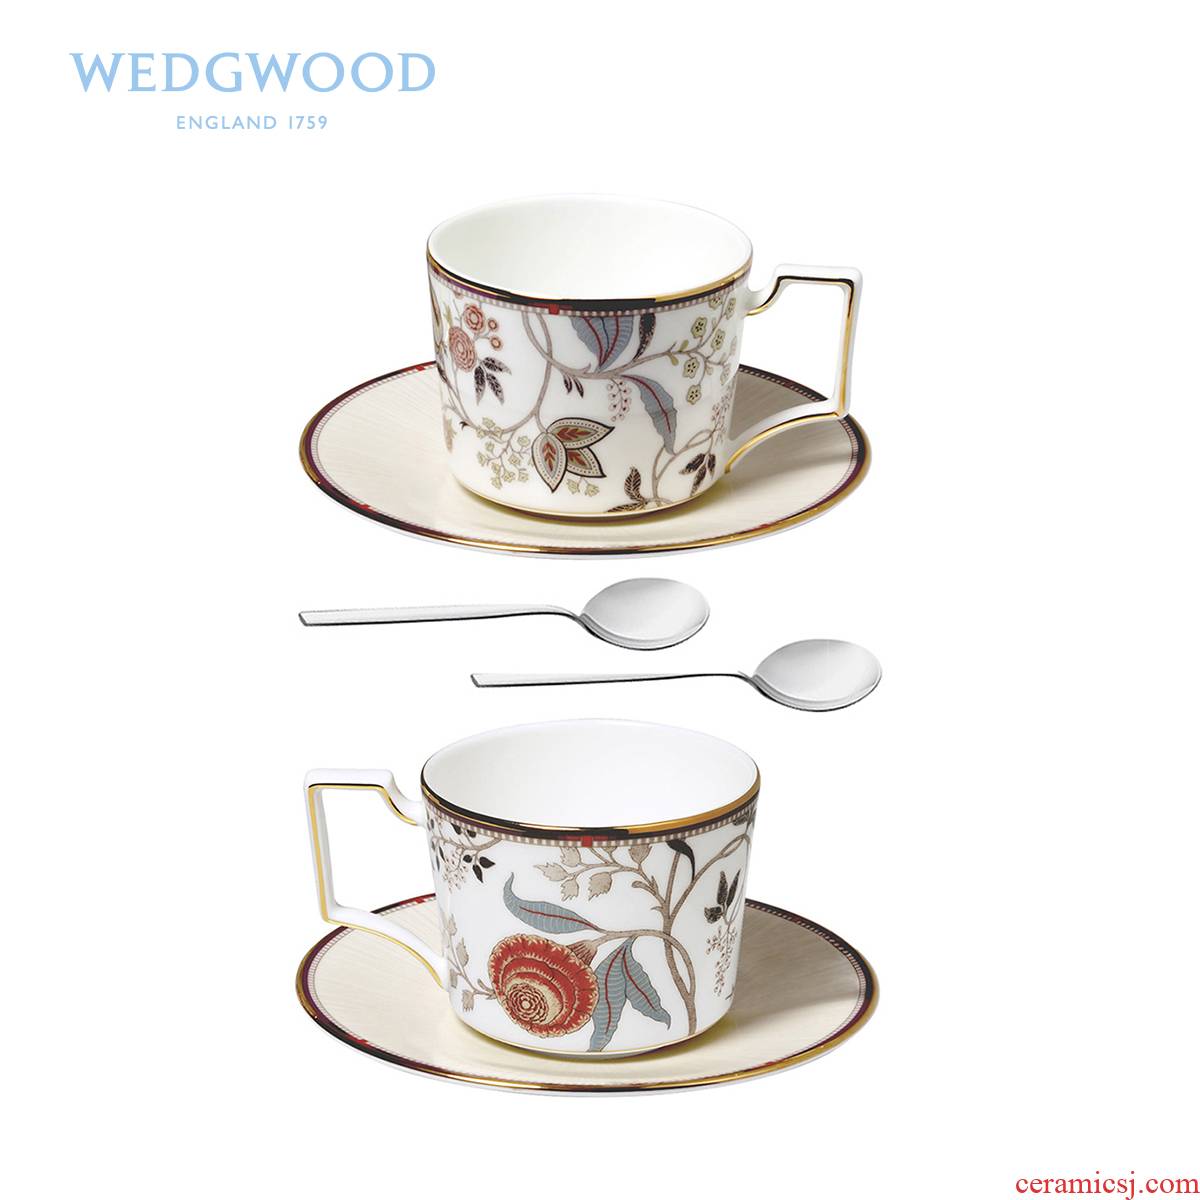 Wedgwood Pashmina Bohemian ipads China tea coffee cup 2 disc 2 tablespoons set suits for European - style coffee